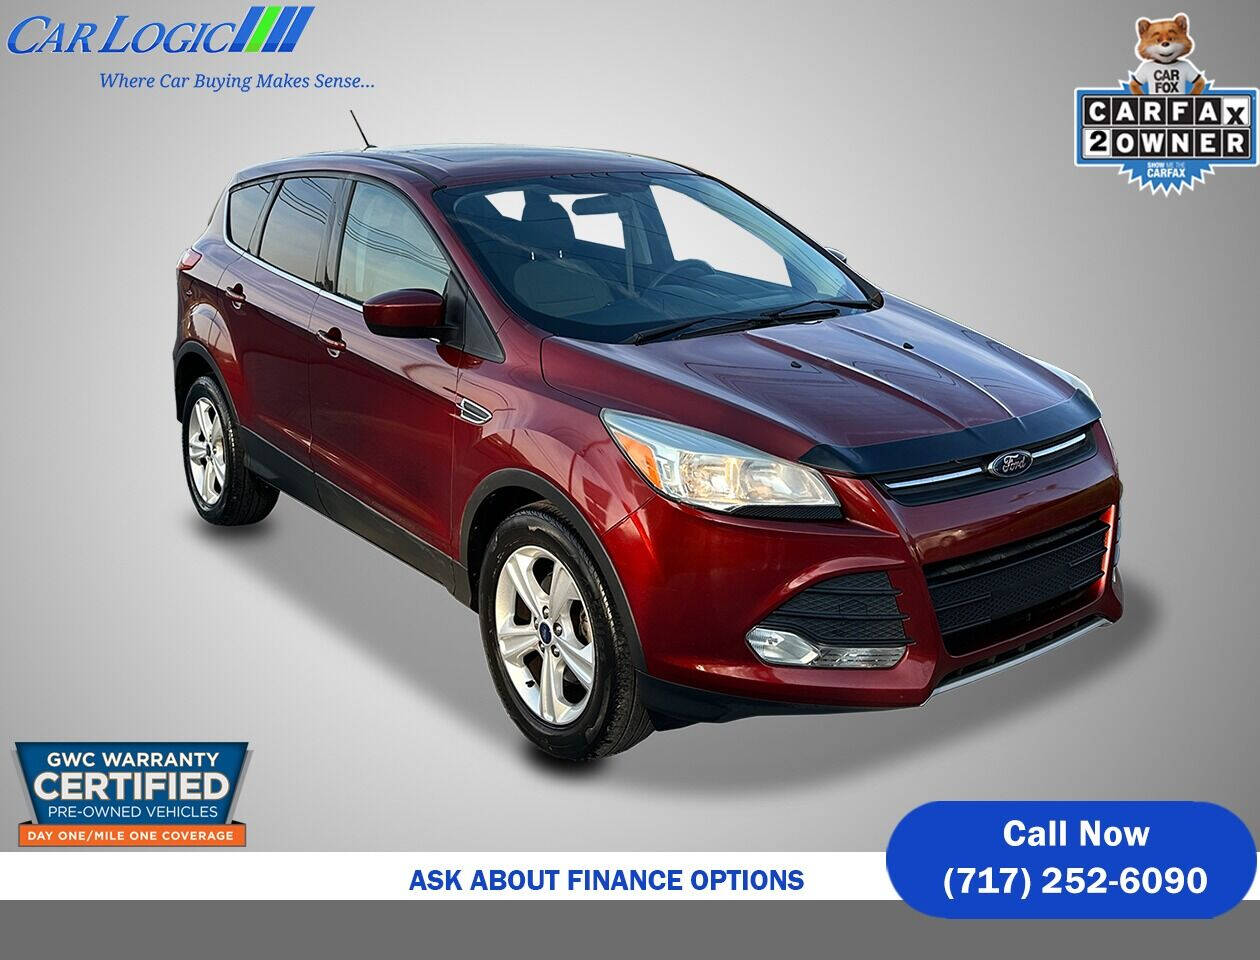 Ford Kuga 1 (MD-Serie)